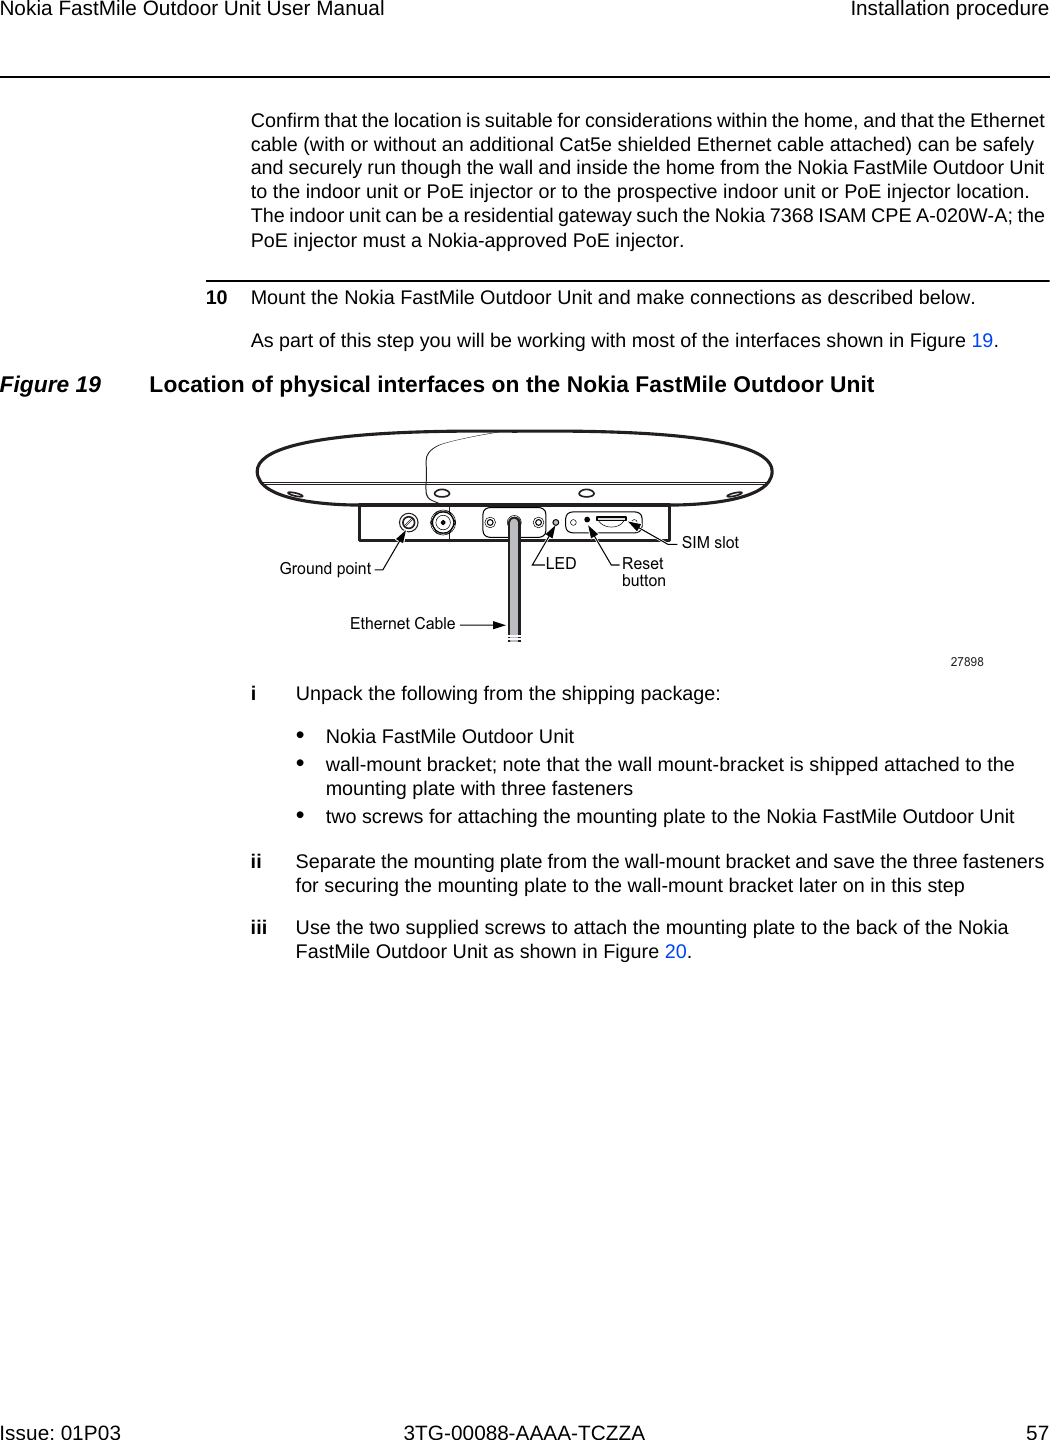 Page 52 of Nokia Bell 34003800FM20 FastMile Compact User Manual Nokia FastMile Outdoor Unit